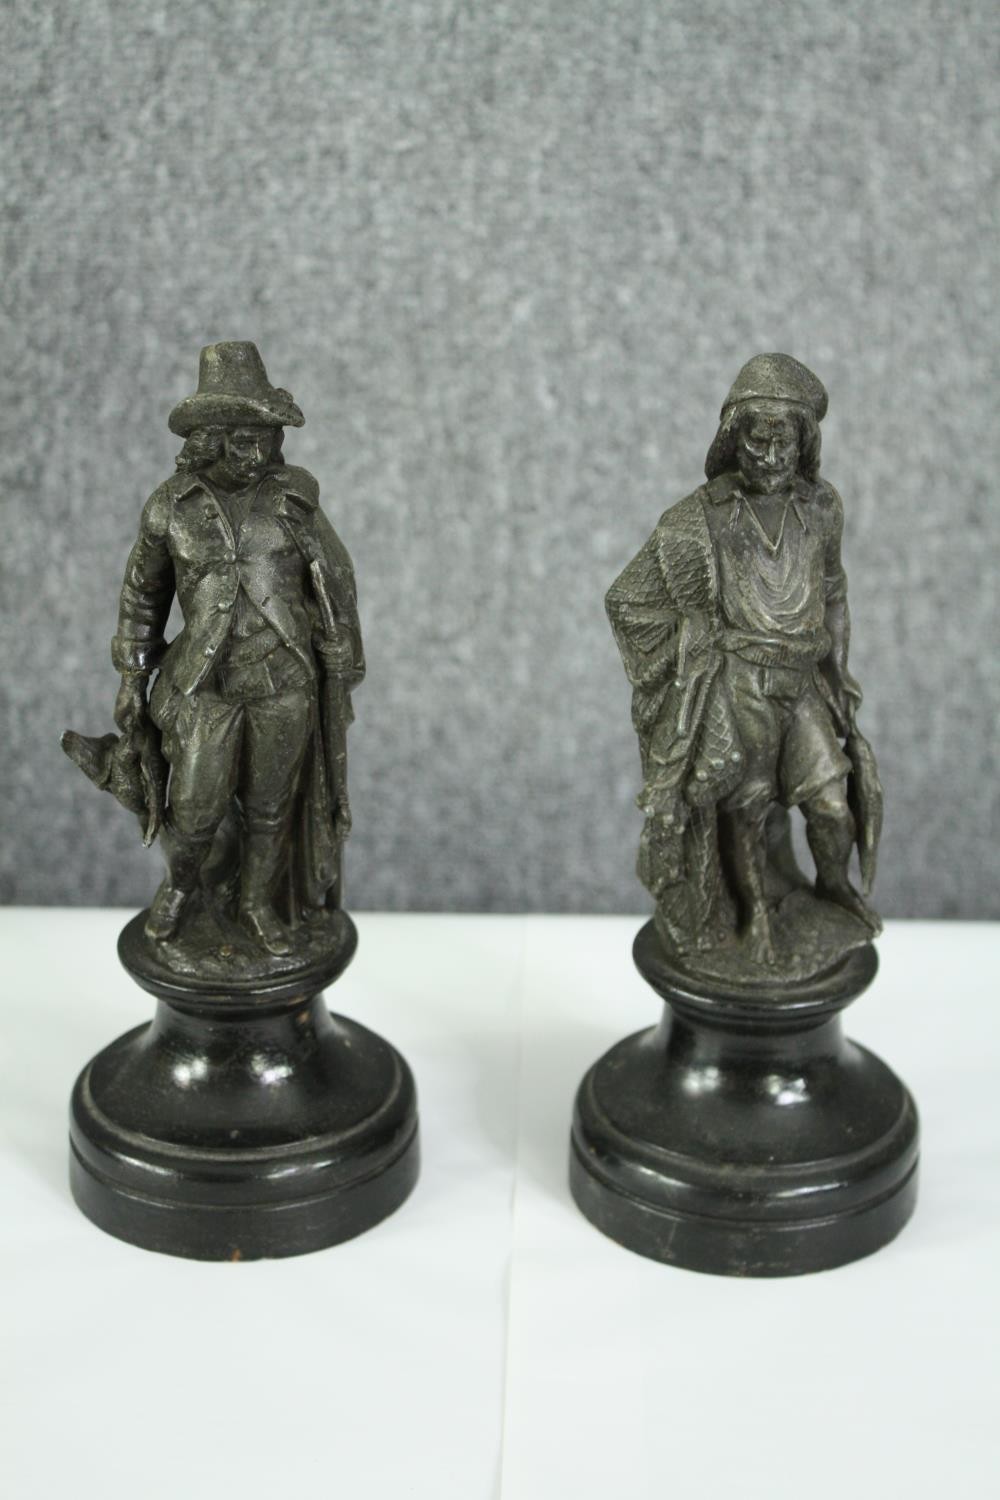 Two 19th century spelter figures of a huntsman and fisherman. H.25cm. (each).